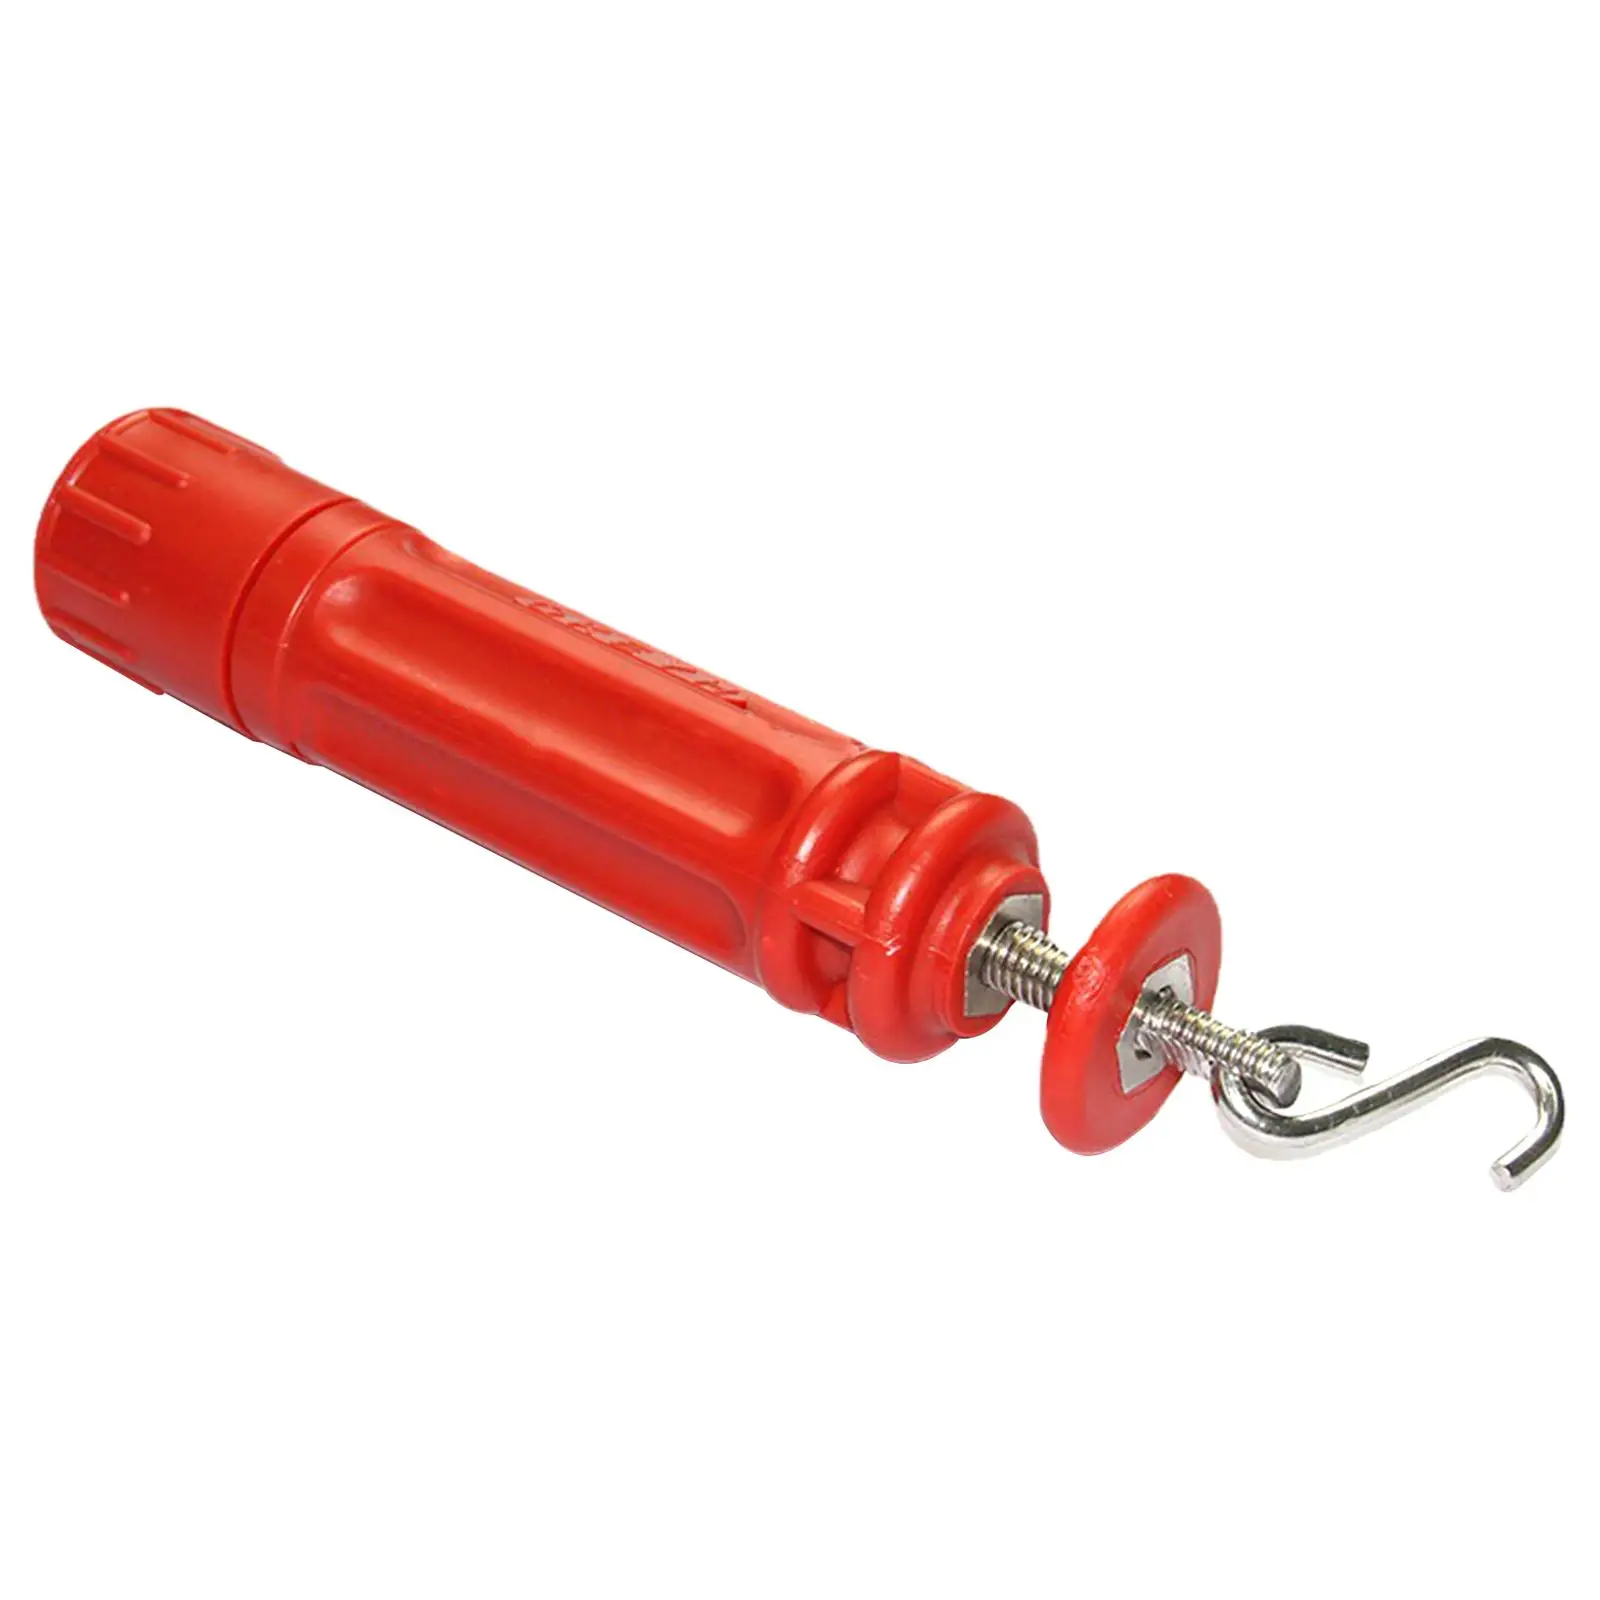 

Lane Line Tensioner for Swimming Pool Cylindrical Adjustable Tightening Shaft Red Pool Equipment Portable Pool Lane Tightener